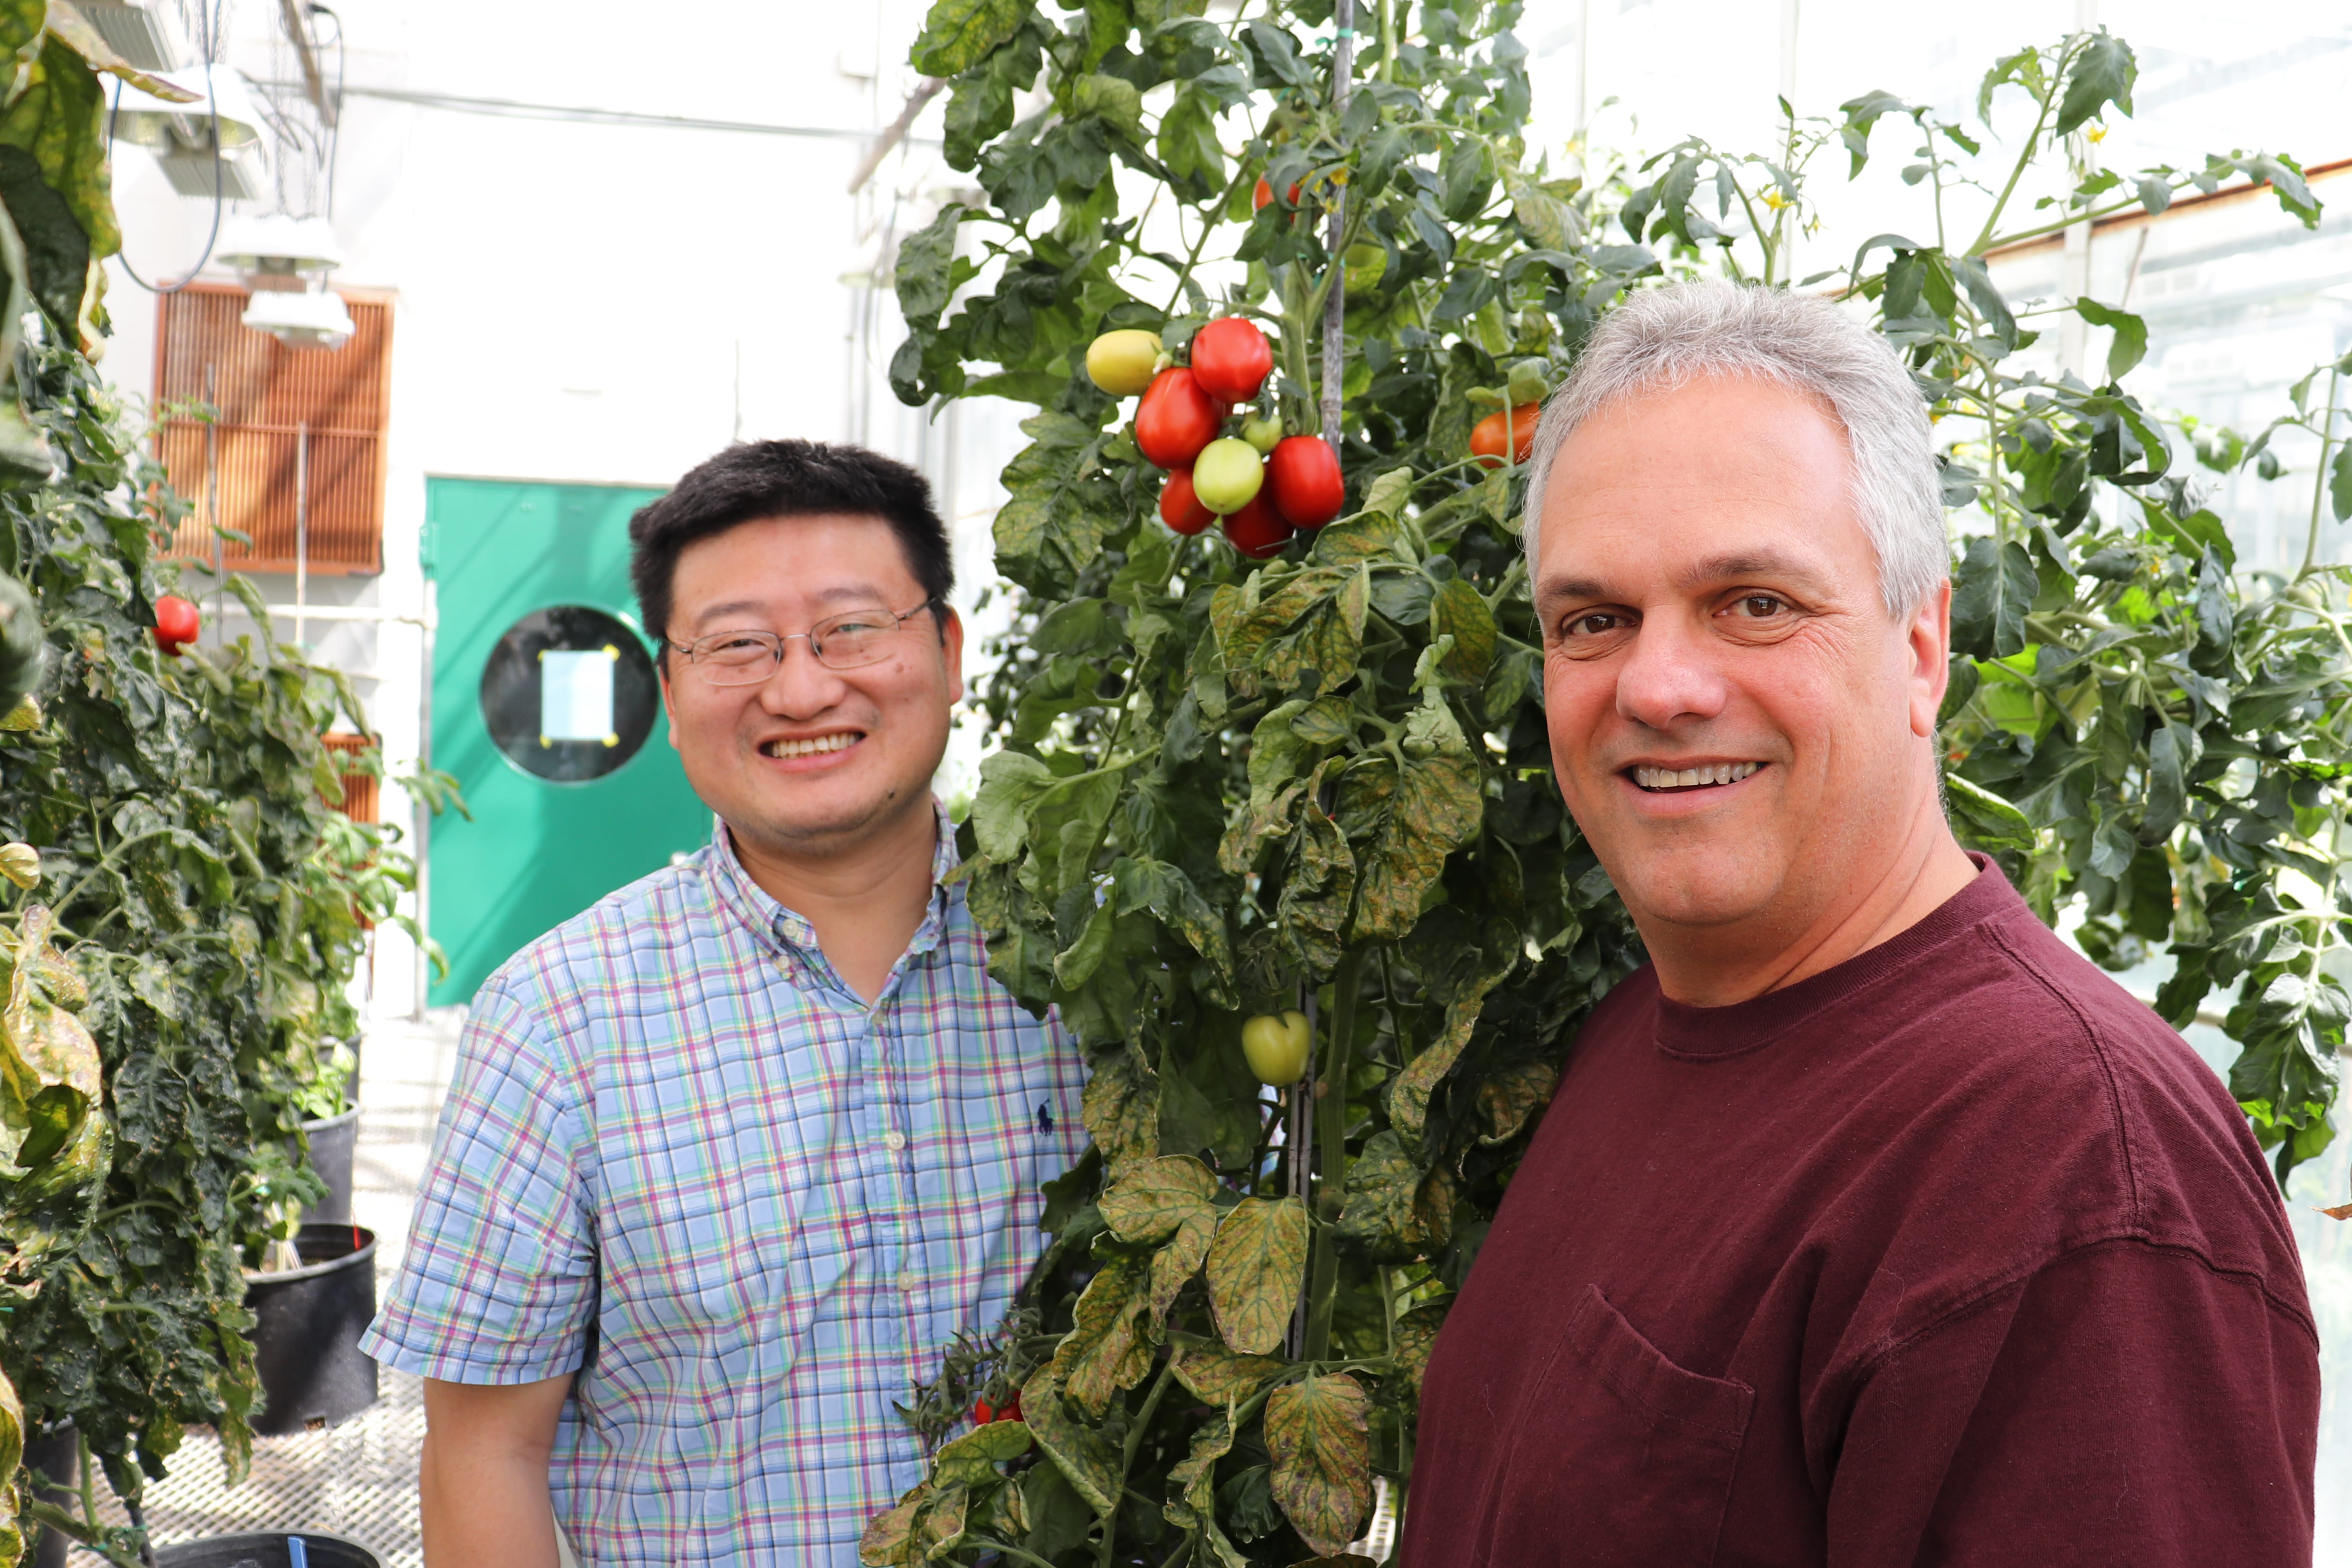 Zhangjun Fei and James Giovannoni stand by a tomato plant in a BTI greenhouse.